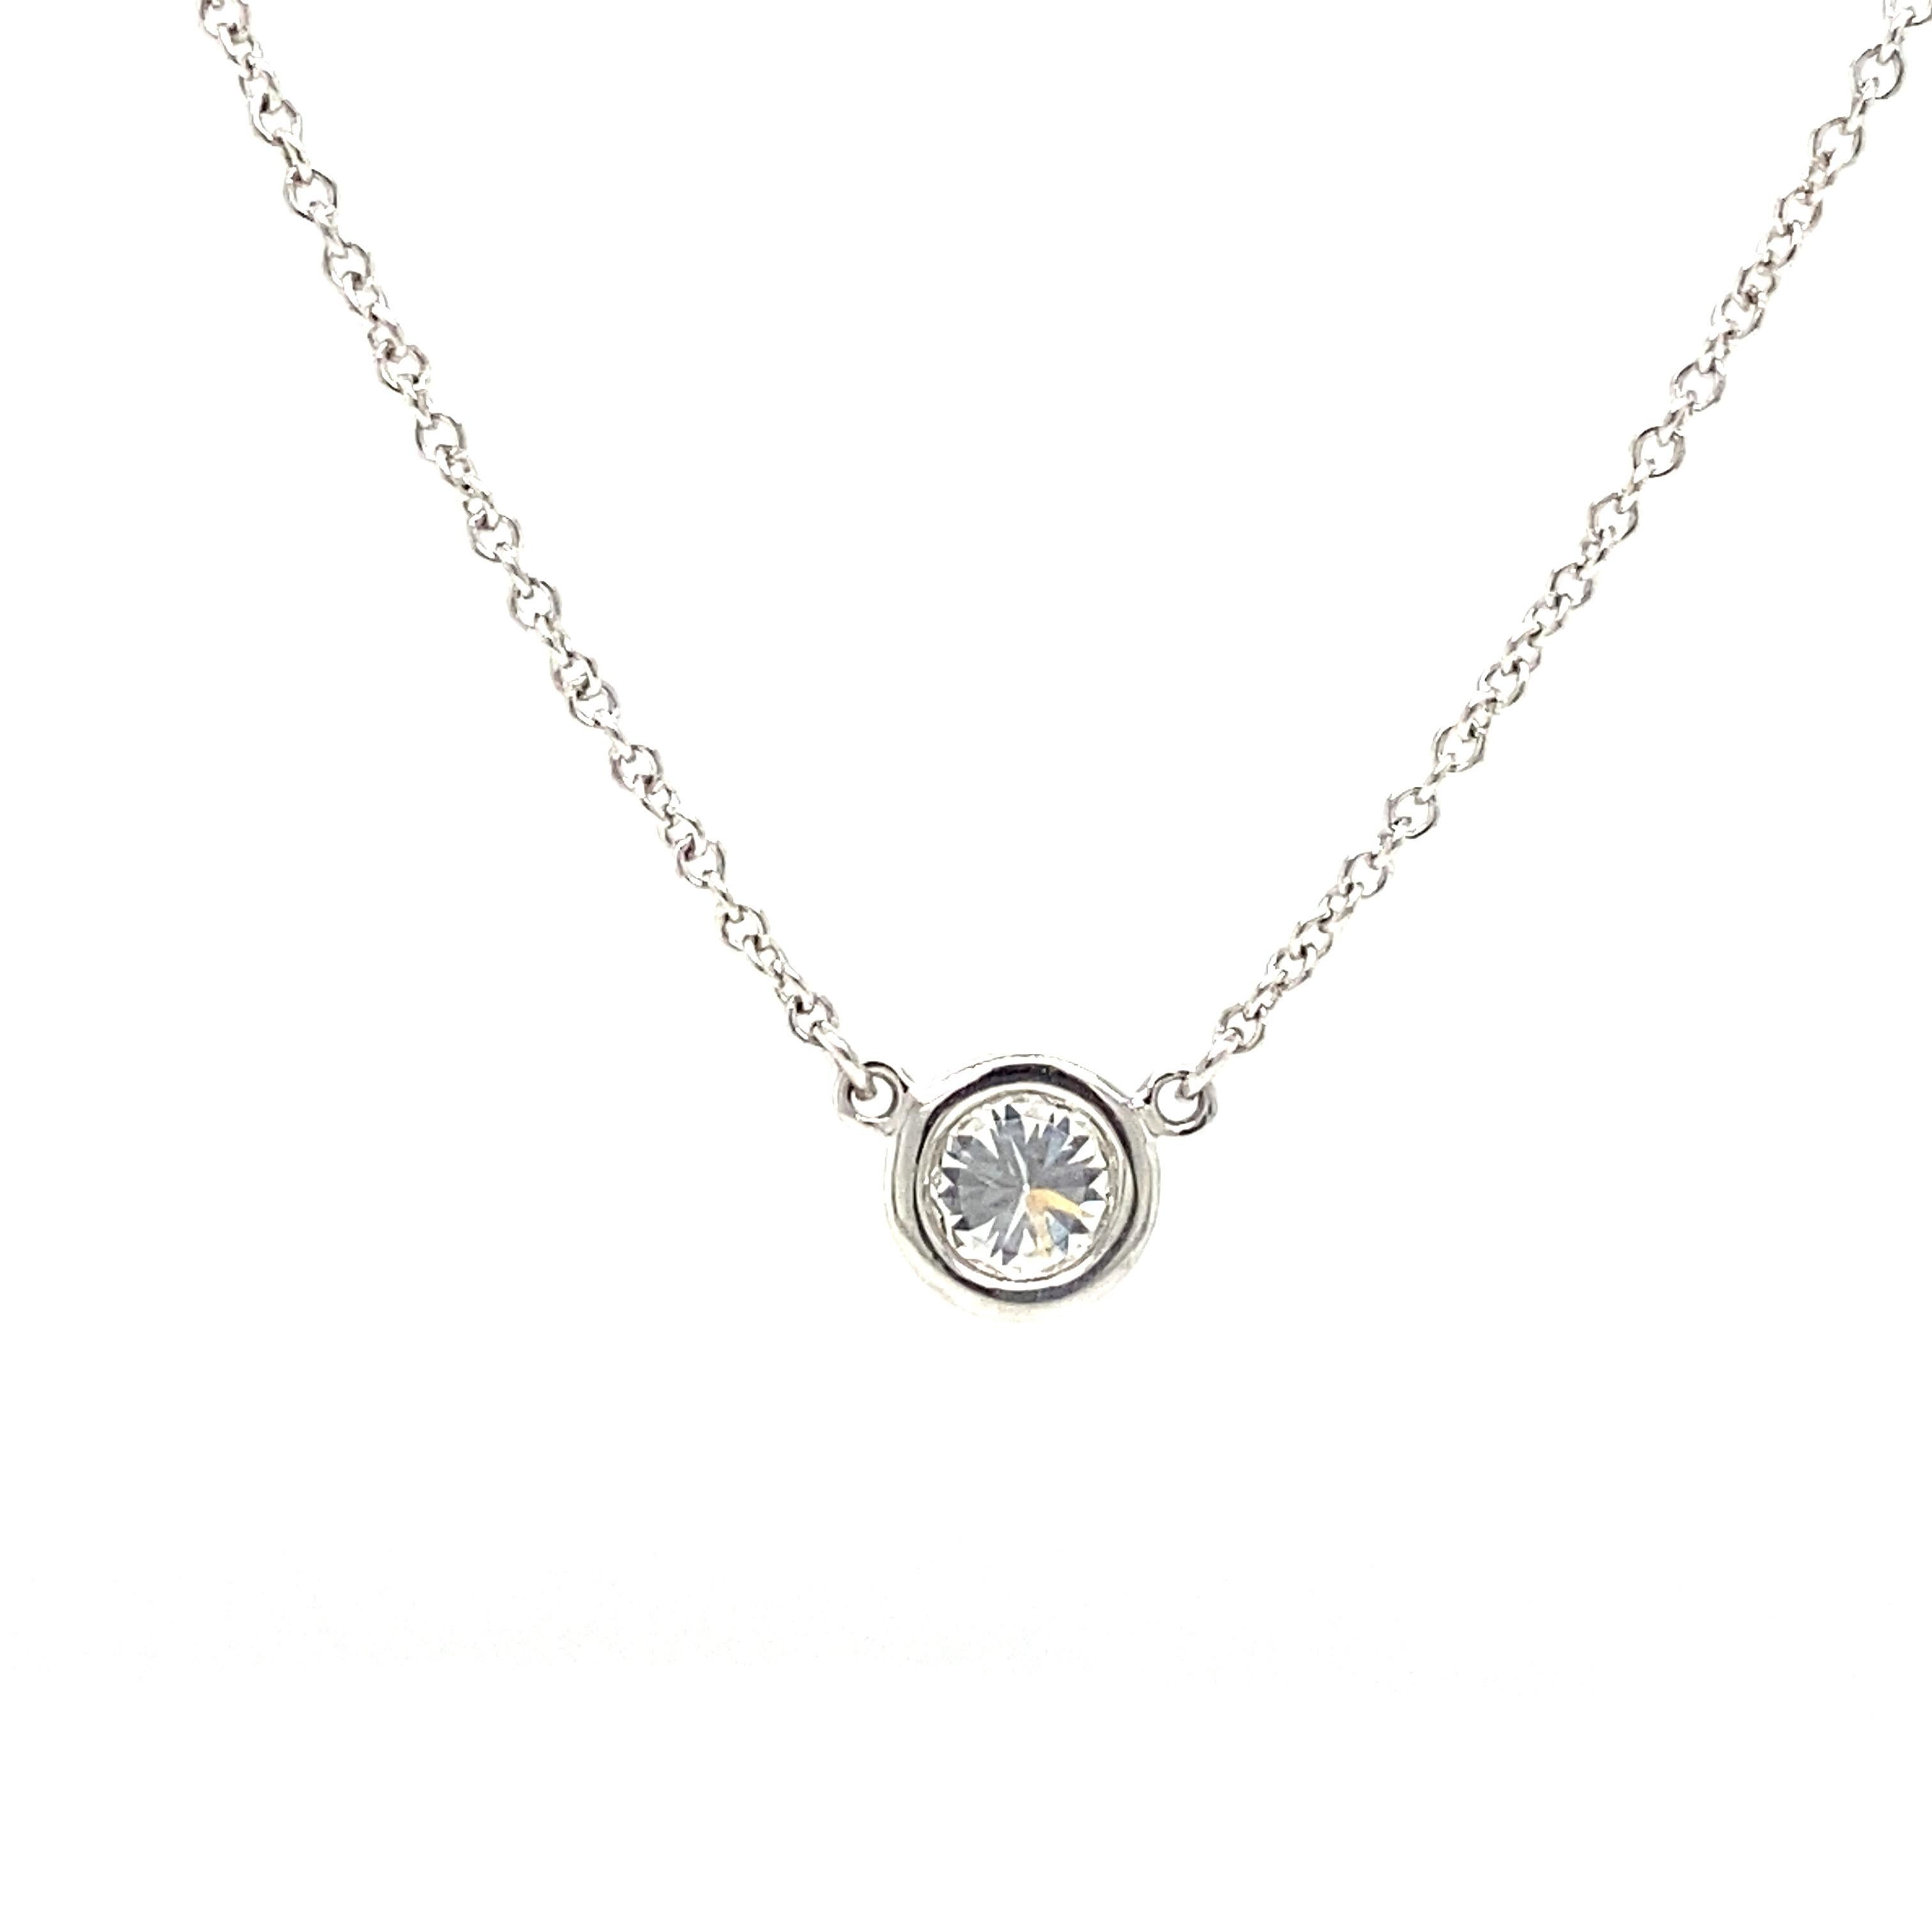 Tiffany & Co. Elsa Peretti Diamond Solitaire Pendant Necklace in Platinum.  (1) Round Brilliant Cut Diamonds weighing 0.33 carat total weight, F in color and VS1 in clarity is expertly bezel set.  The Necklace measures 16 inch in length.  Signed. 